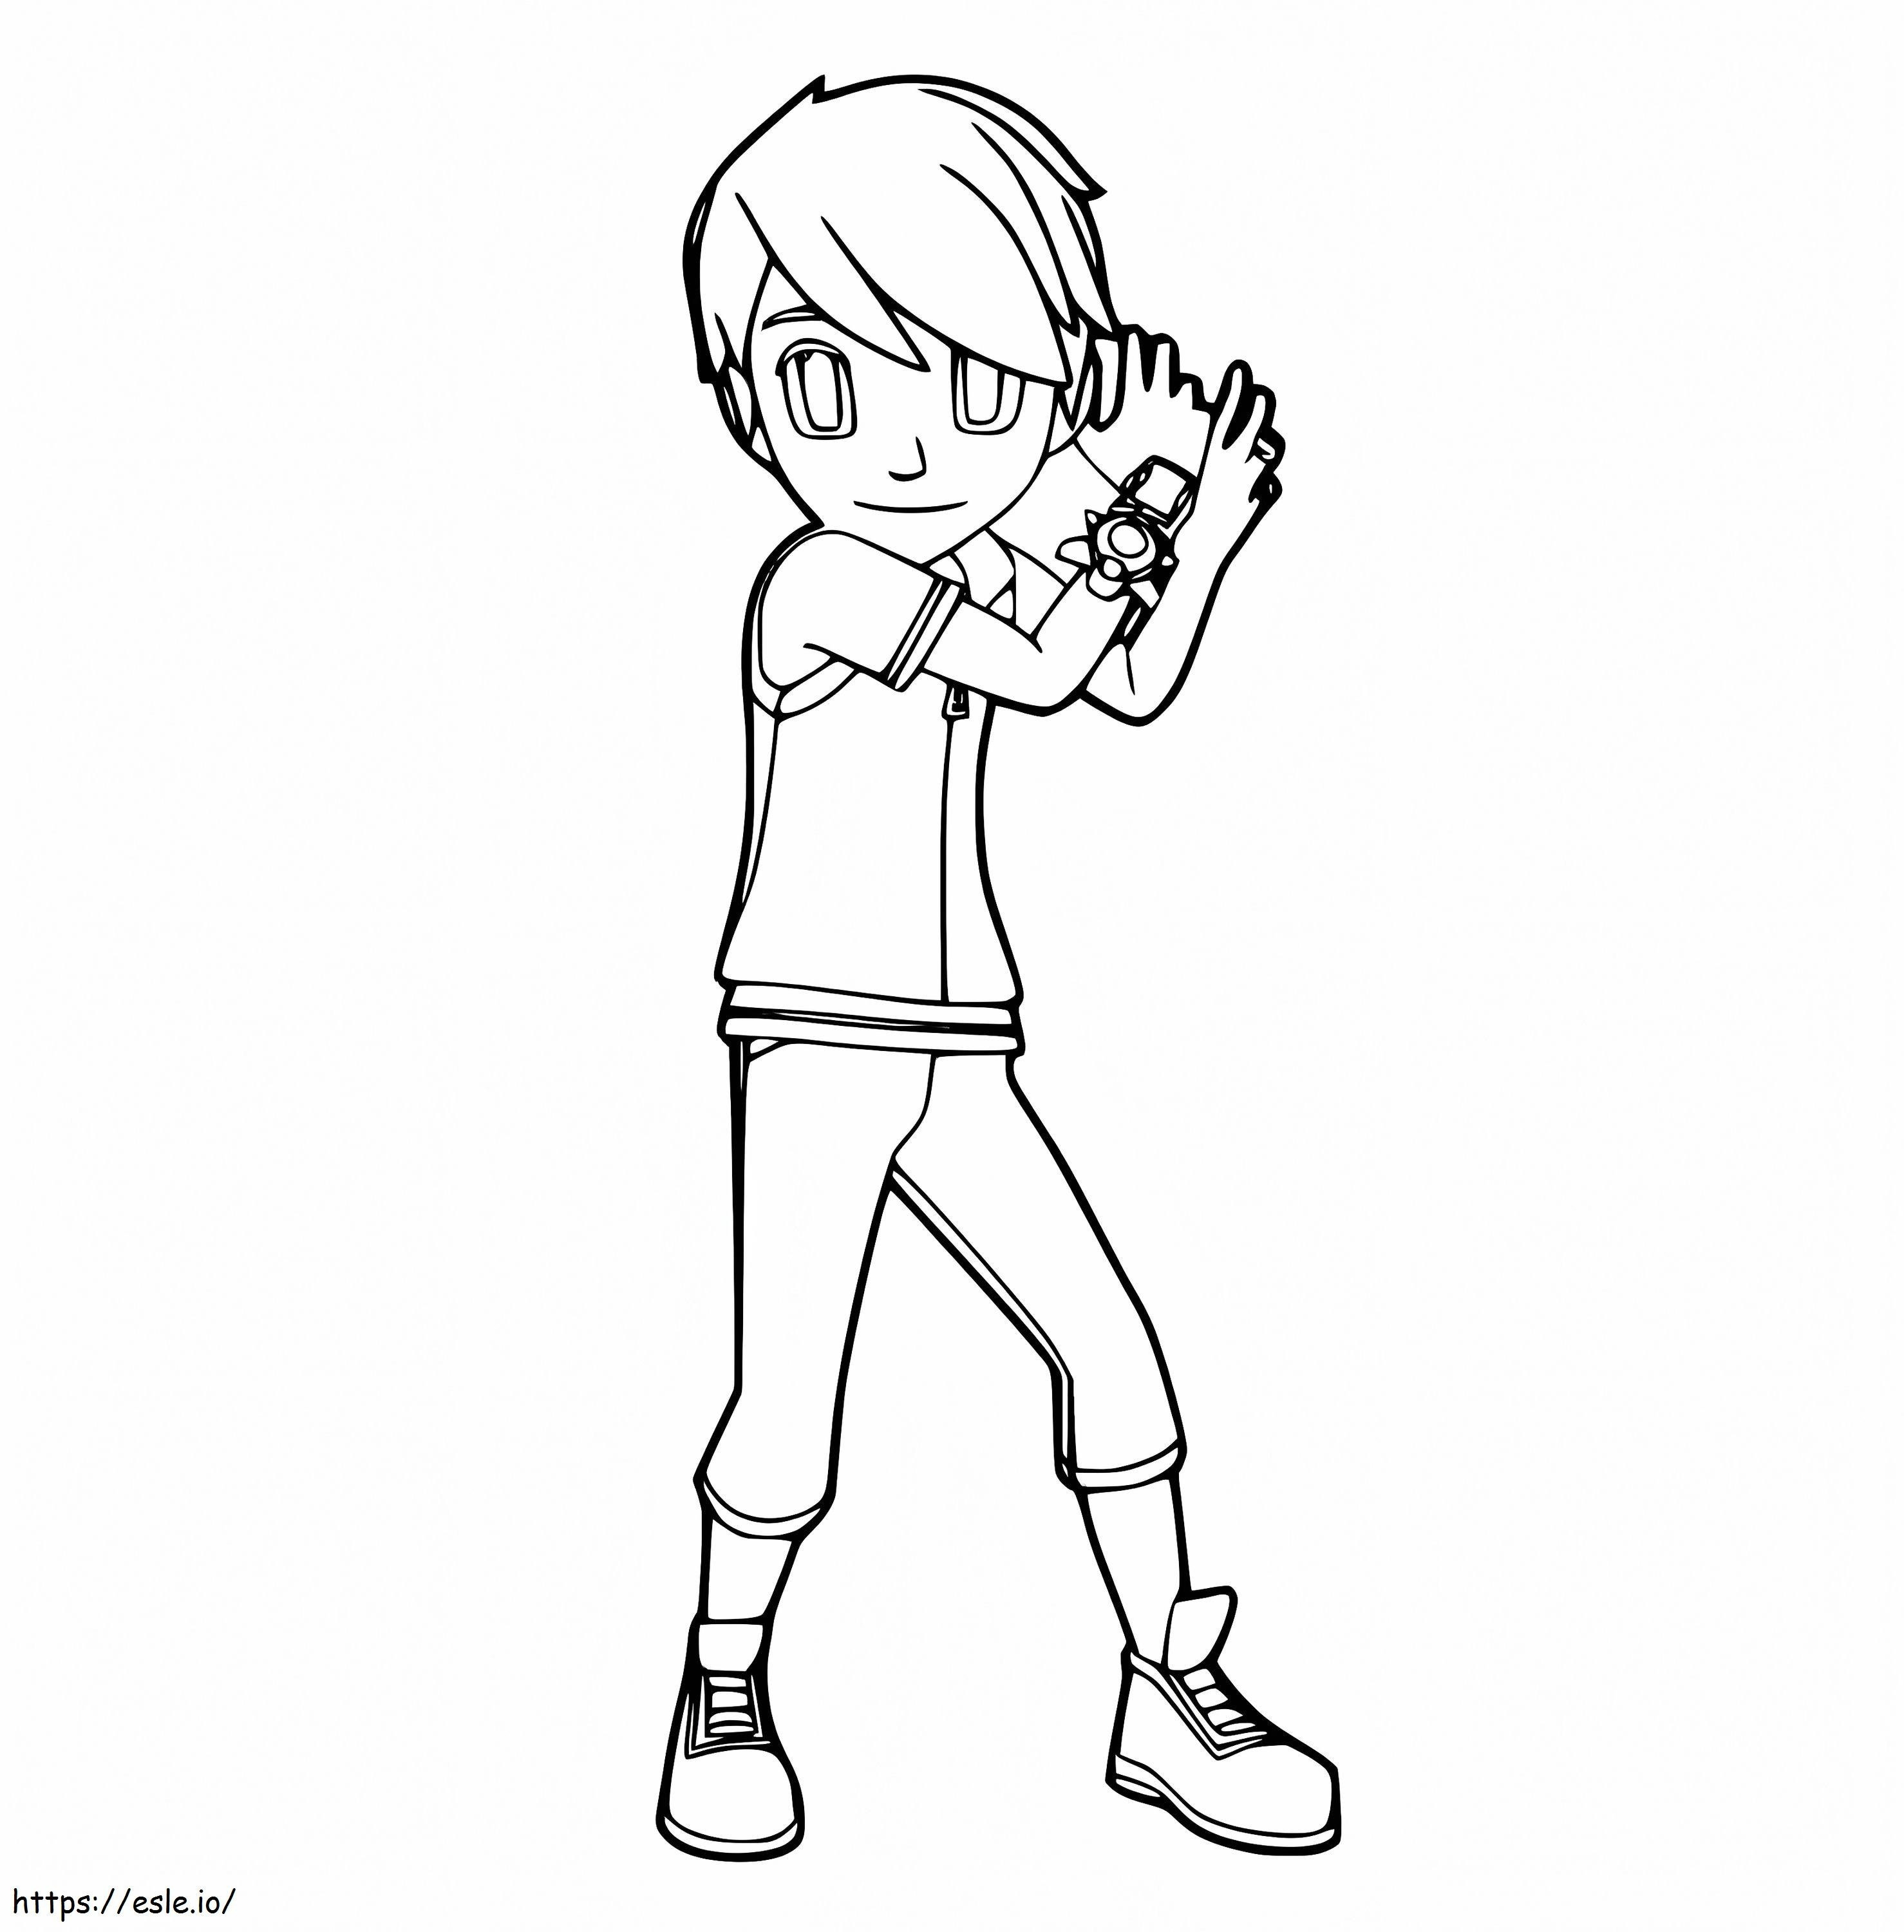 Ryan Char From Tobot coloring page